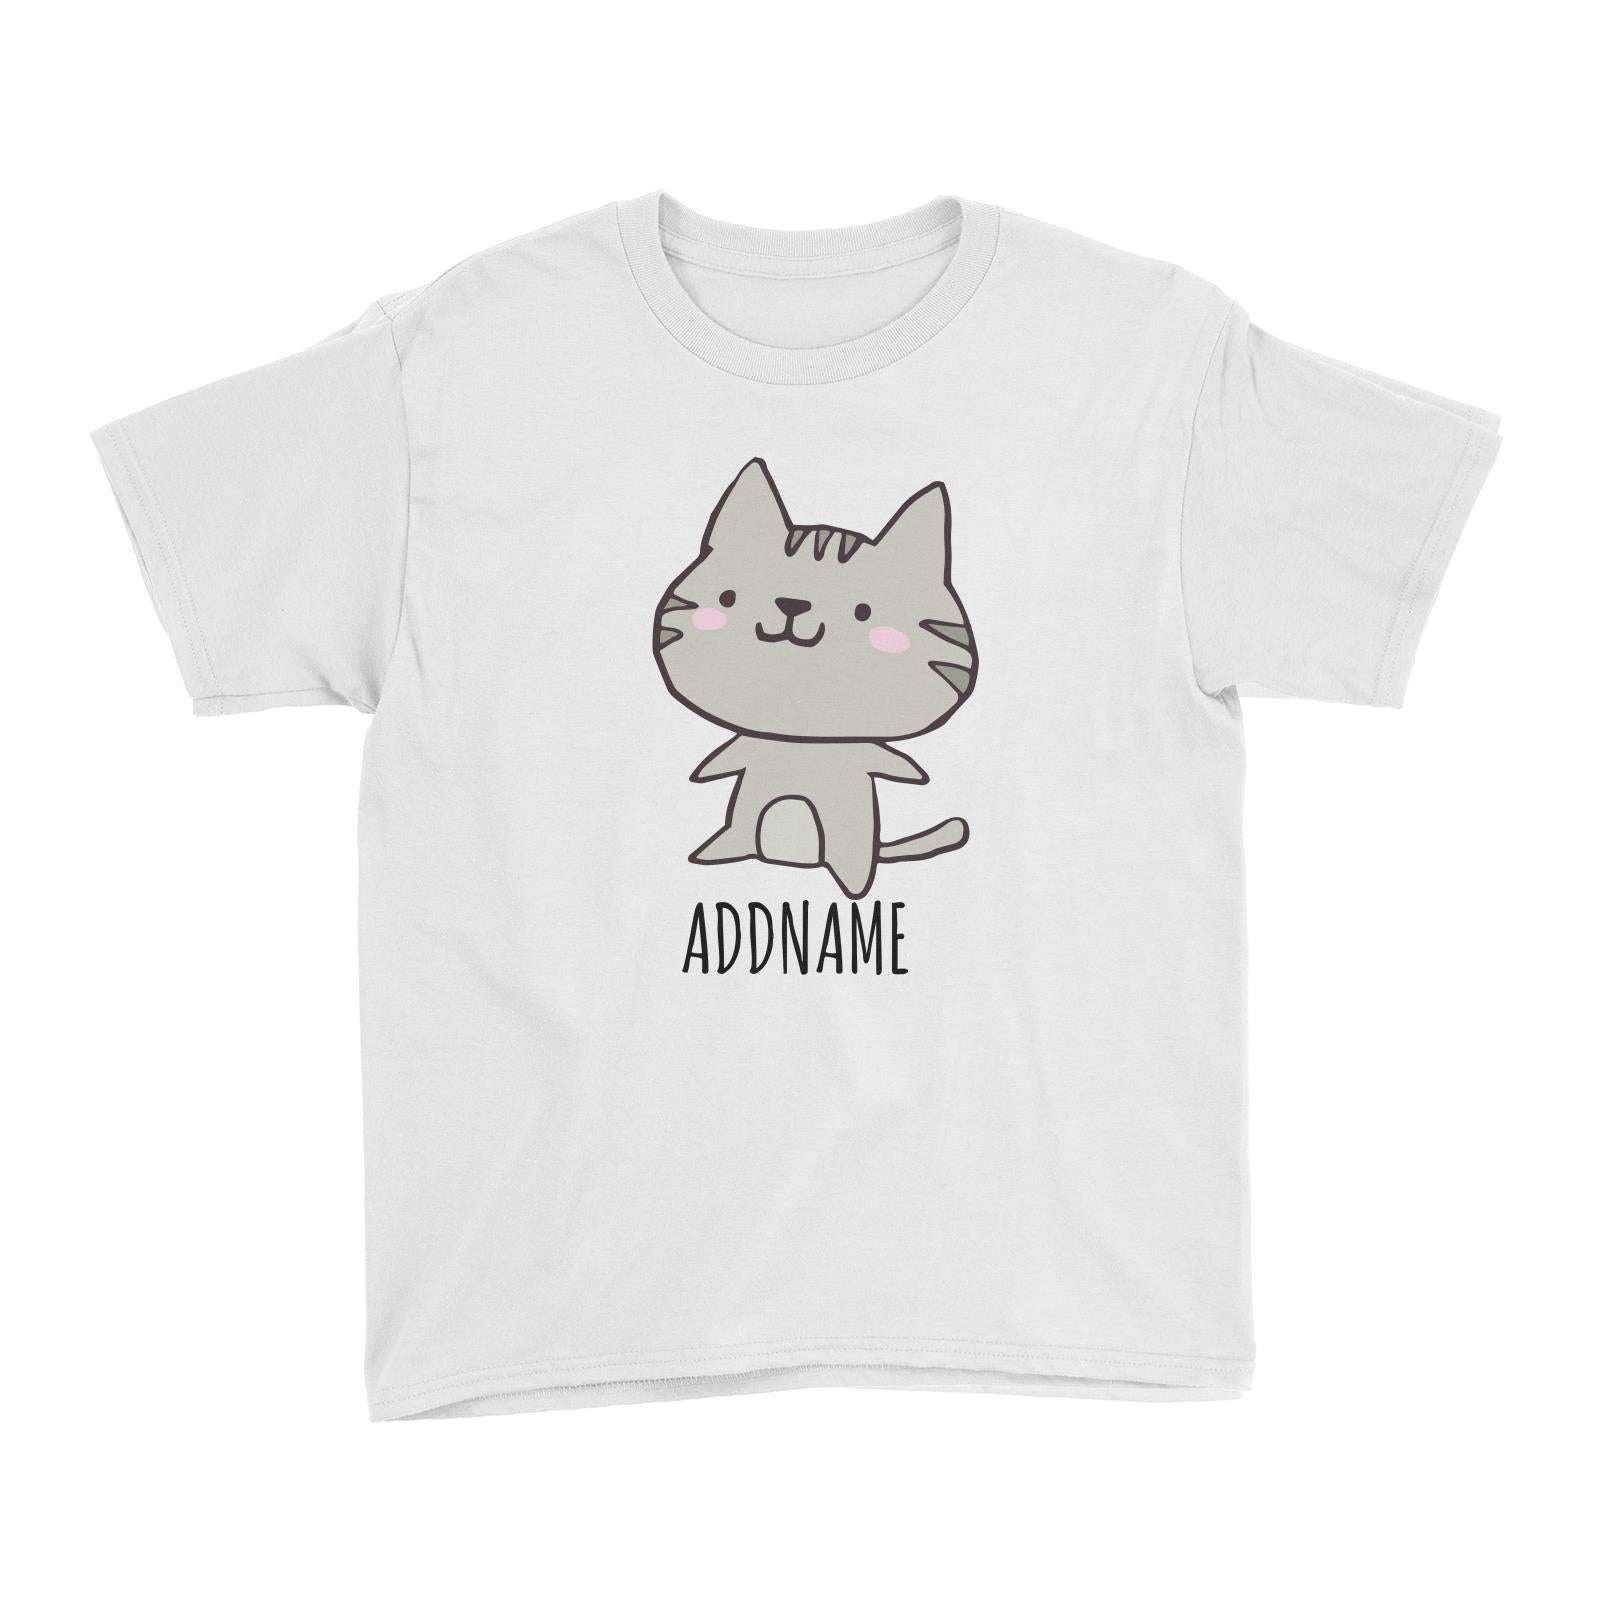 Cartoon Kawaii Cat Doodle White White Kid's T-Shirt  Matching Family Personalizable Designs